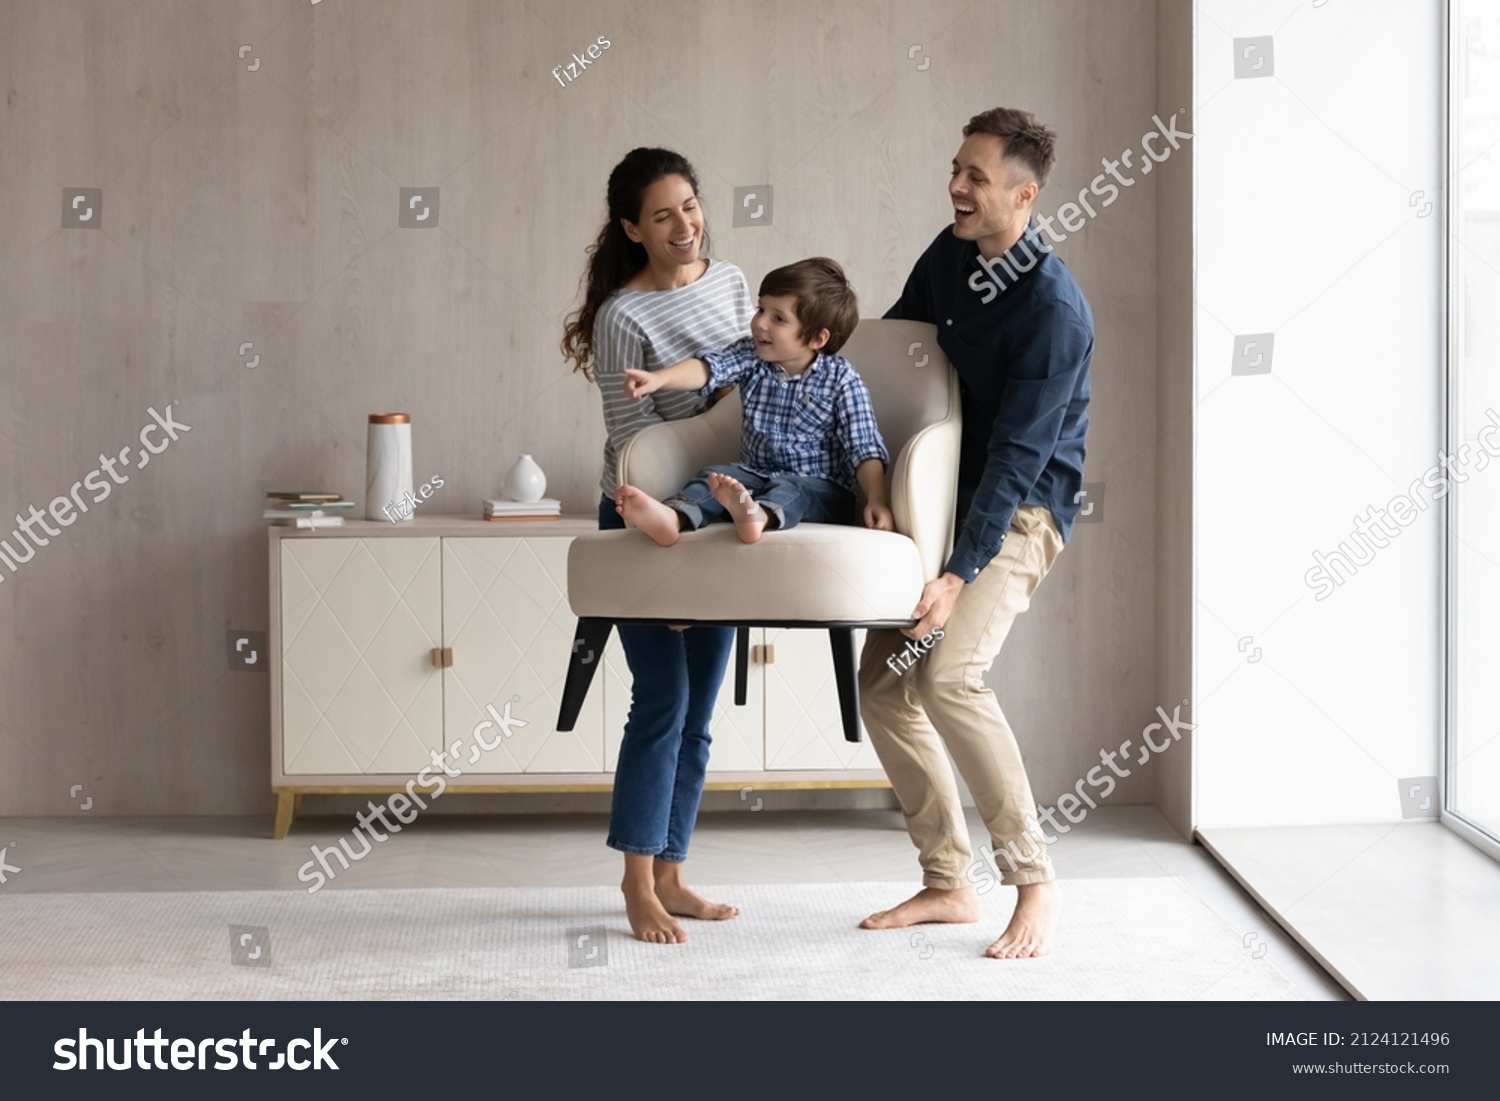 Couple of happy funny parents holding cheerful little son sat in armchair. Family moving into new house, carrying furniture, feeling joy. Mom and dad playing active games with kid. Relocation concept #2124121496